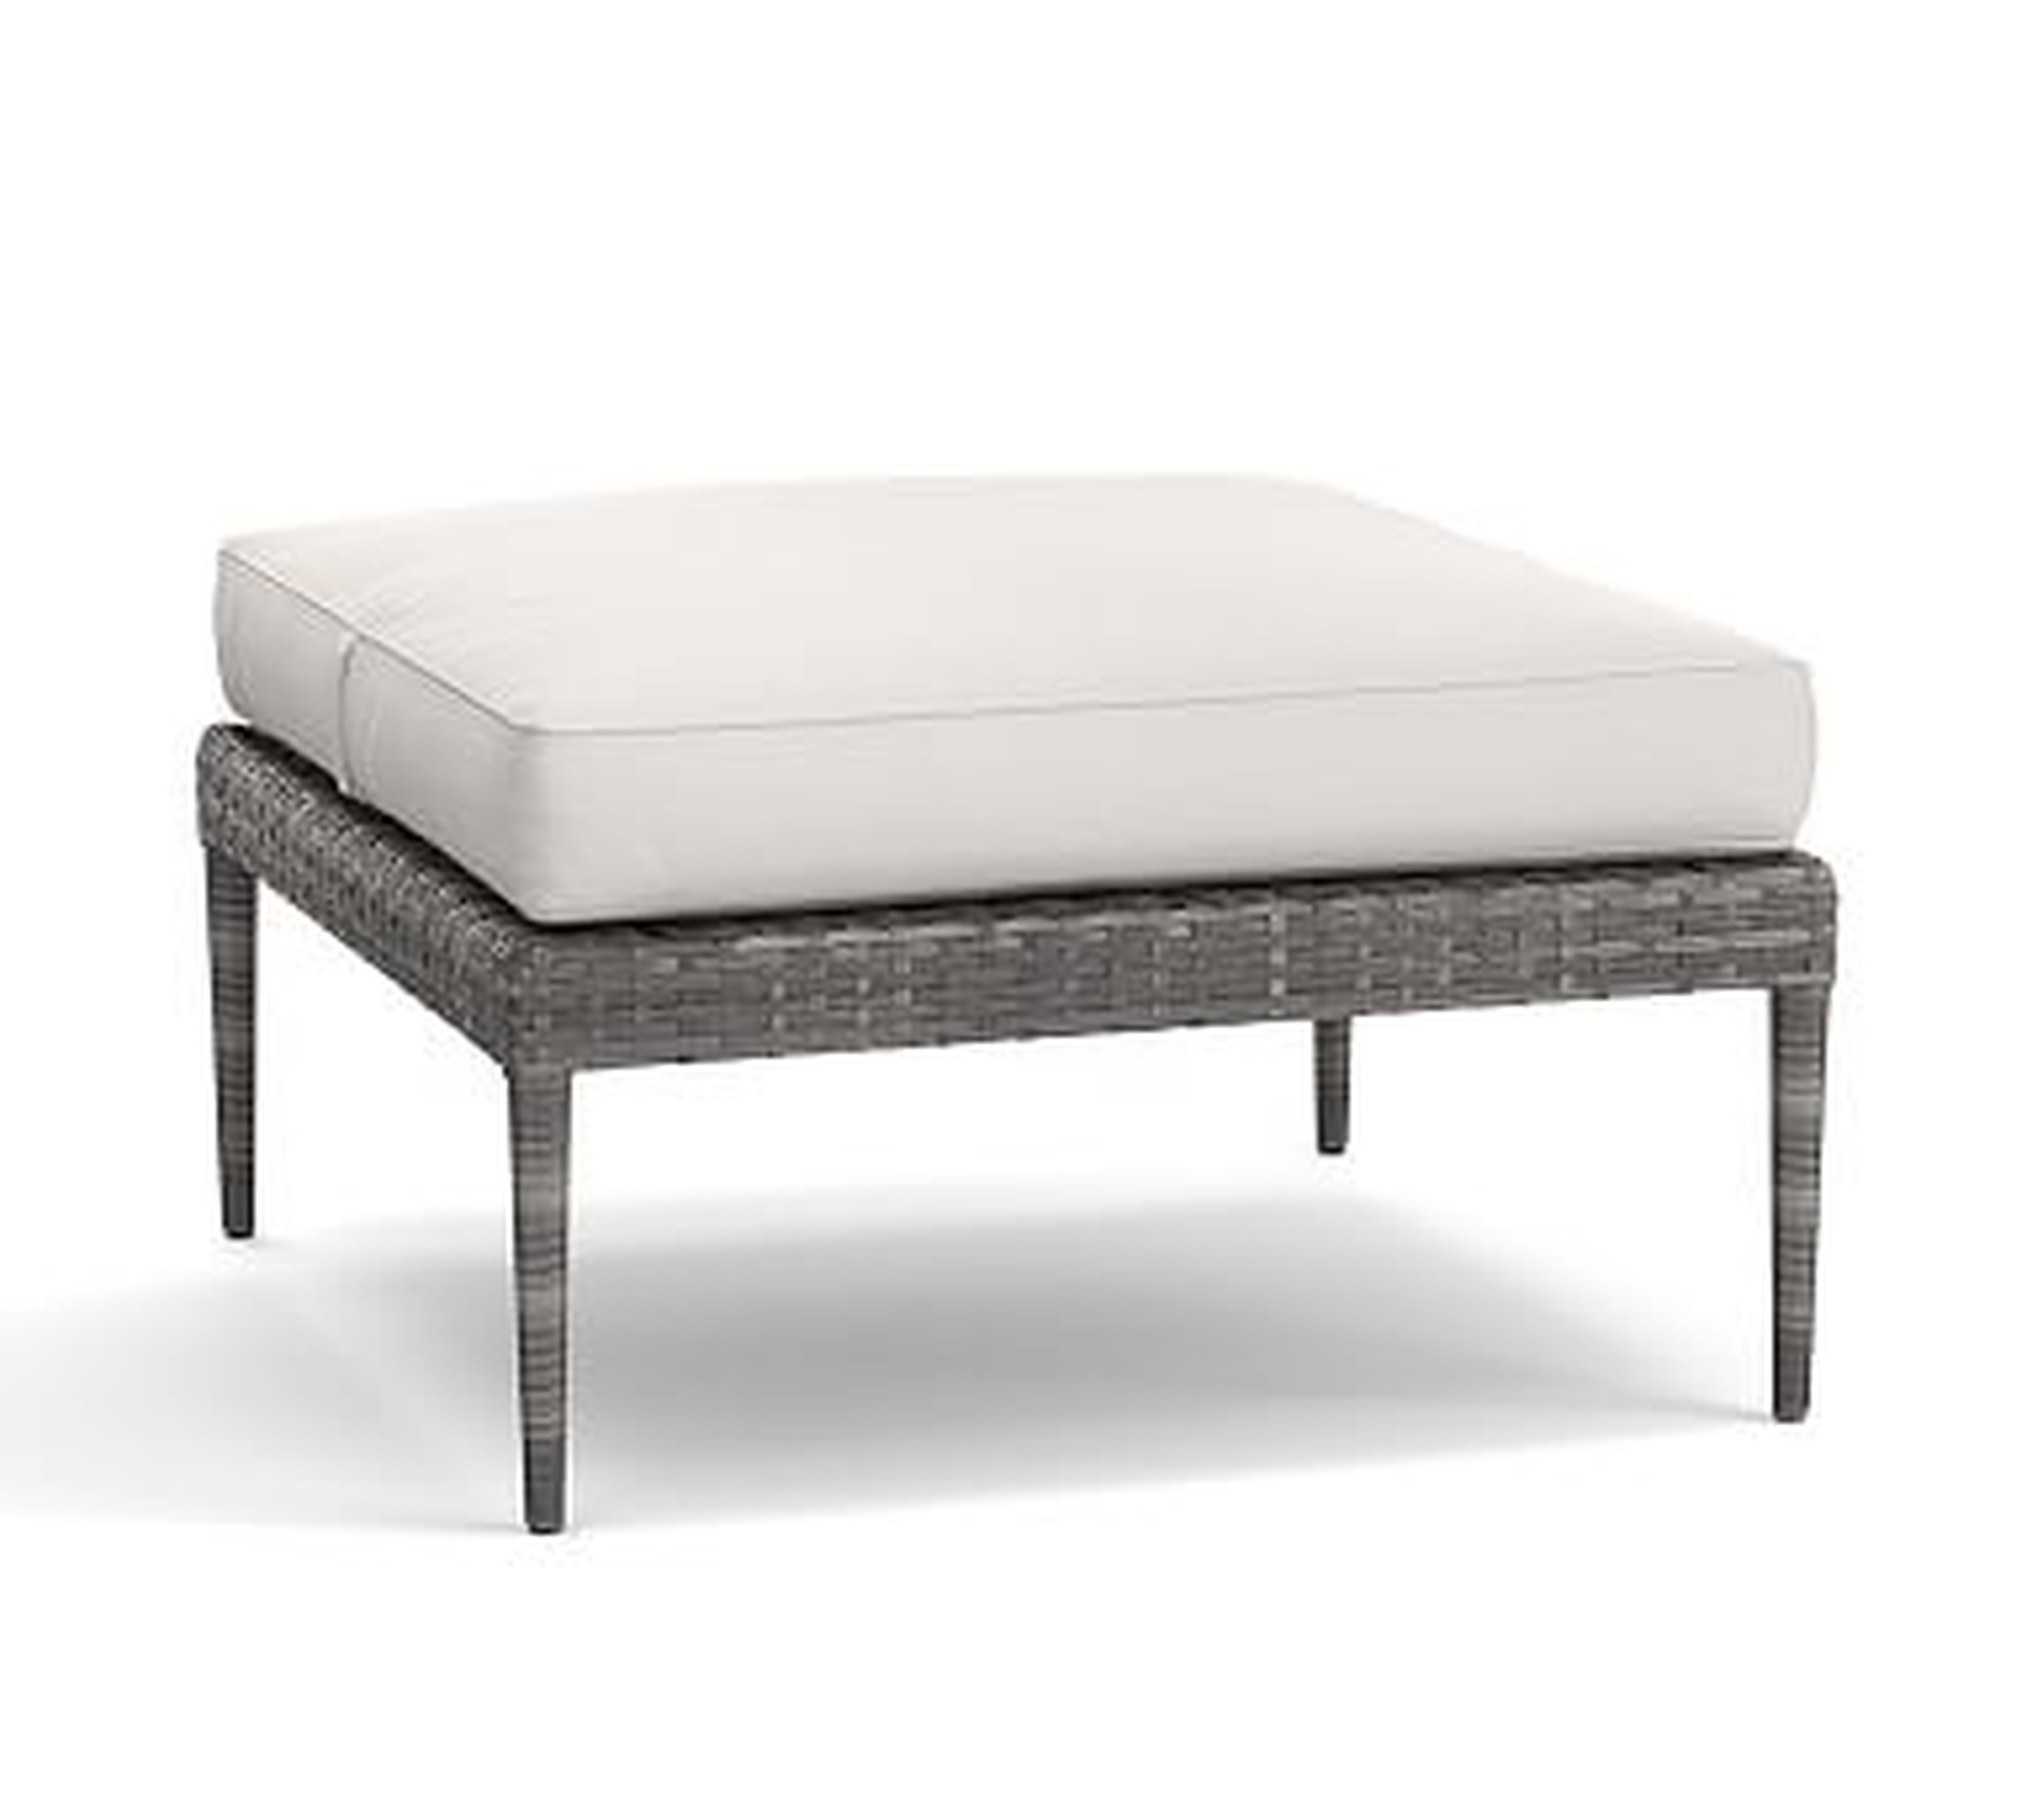 Cammeray All-Weather Wicker Outdoor Sectional, Ottoman with Cushion, Gray - Pottery Barn